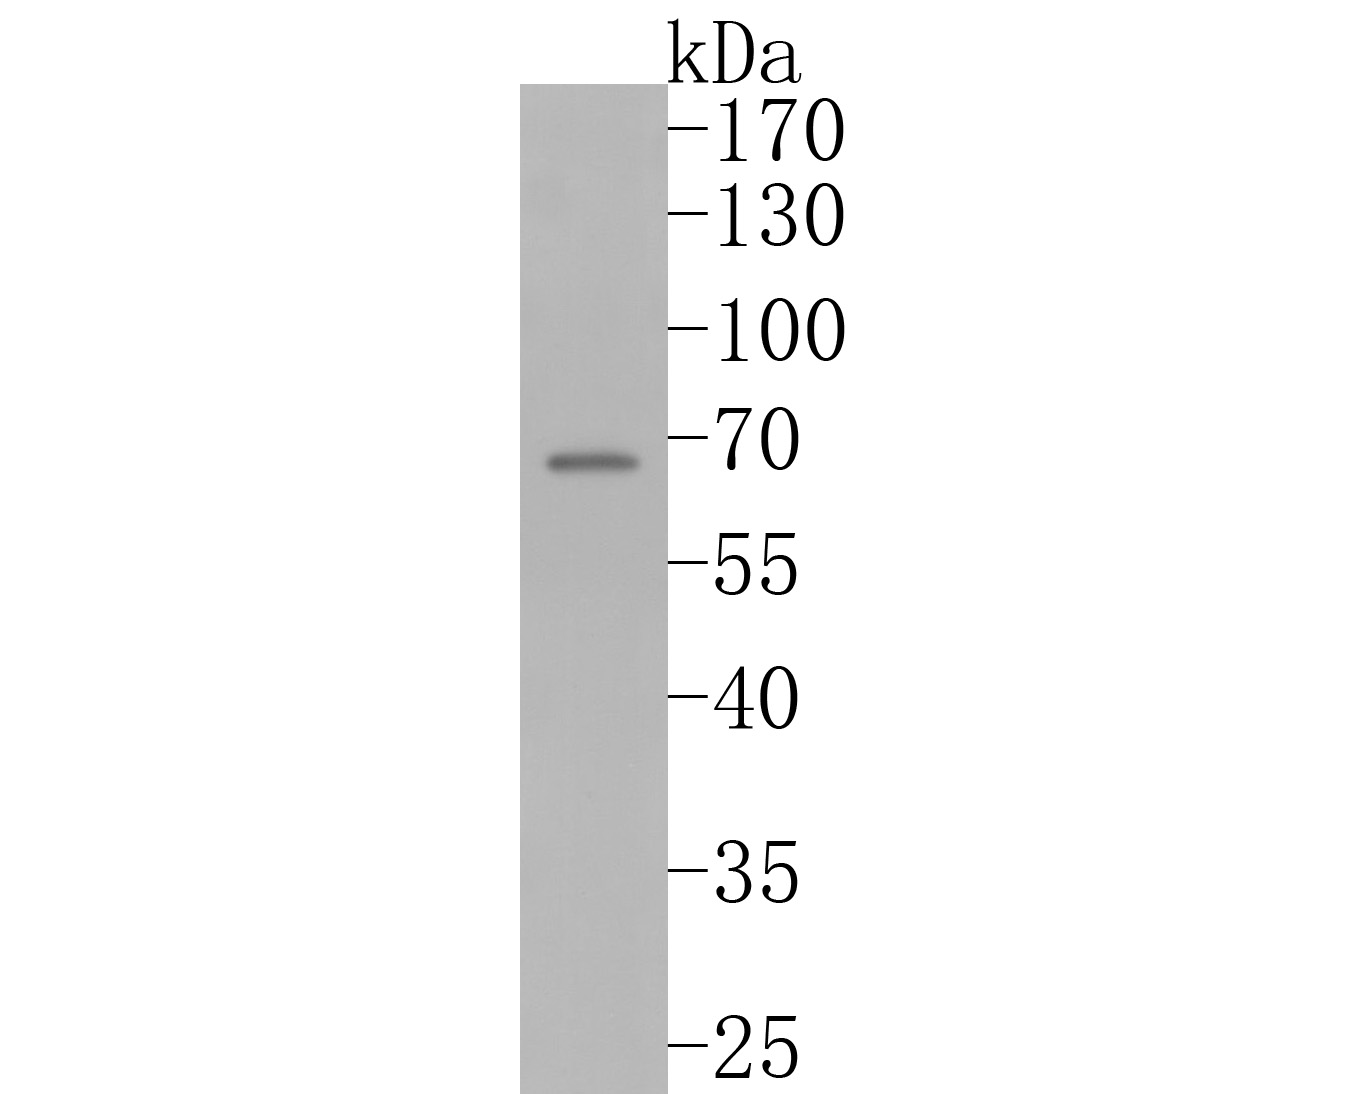 Western blot analysis of CRMP3 on SH-SY5Y cell lysates. Proteins were transferred to a PVDF membrane and blocked with 5% BSA in PBS for 1 hour at room temperature. The primary antibody (HA720021, 1/500) was used in 5% BSA at room temperature for 2 hours. Goat Anti-Rabbit IgG - HRP Secondary Antibody (HA1001) at 1:5,000 dilution was used for 1 hour at room temperature.